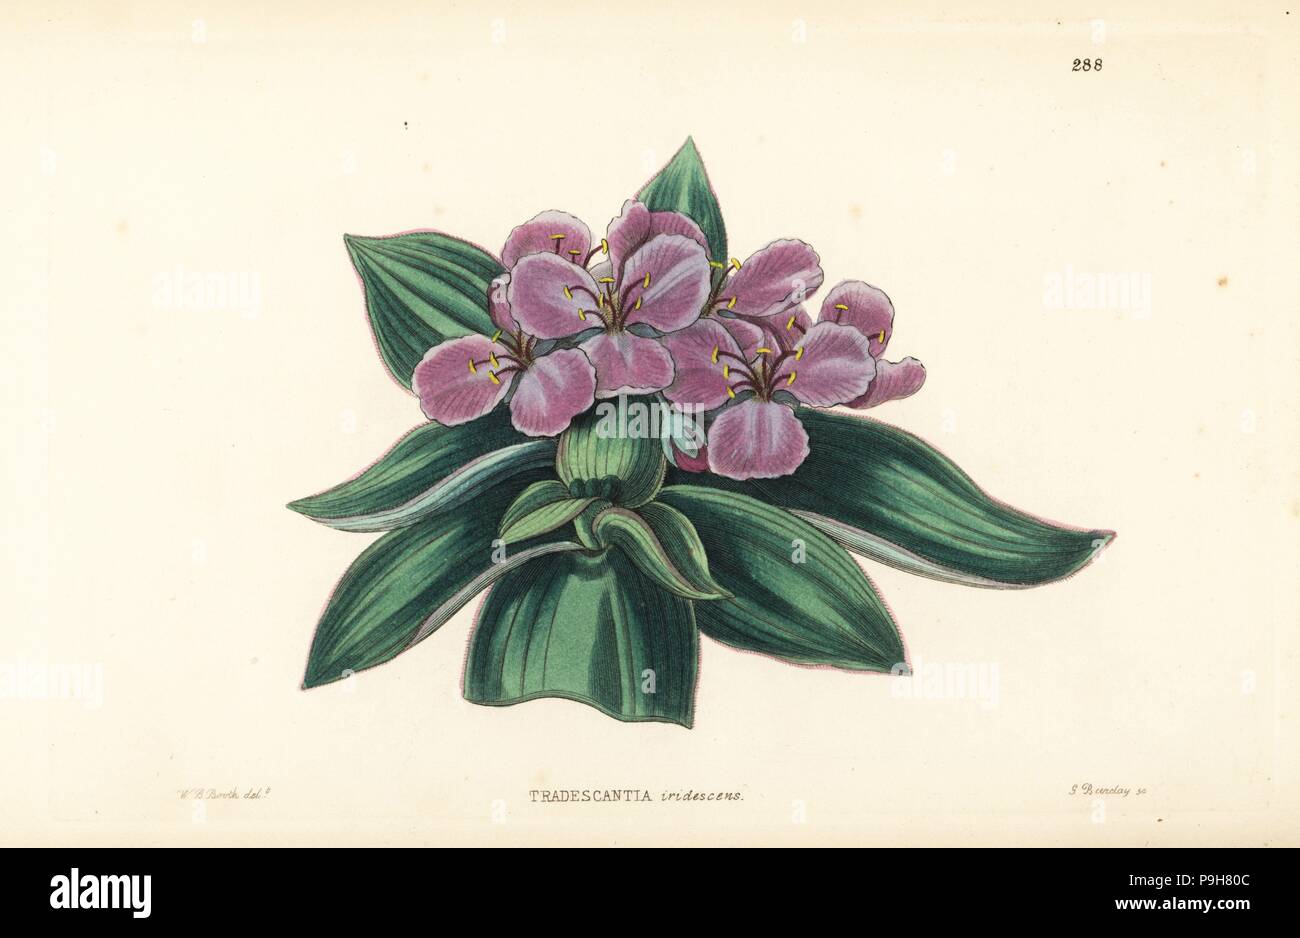 Spiderwort, Tradescantia crassifolia var. acaulis (Iridescent tradescantia, Tradescantia iridescens). Handcoloured copperplate engraving by G. Barclay after W. B. Booth from John Lindley and Robert Sweet's Ornamental Flower Garden and Shrubbery, G. Willis, London, 1854. Stock Photo